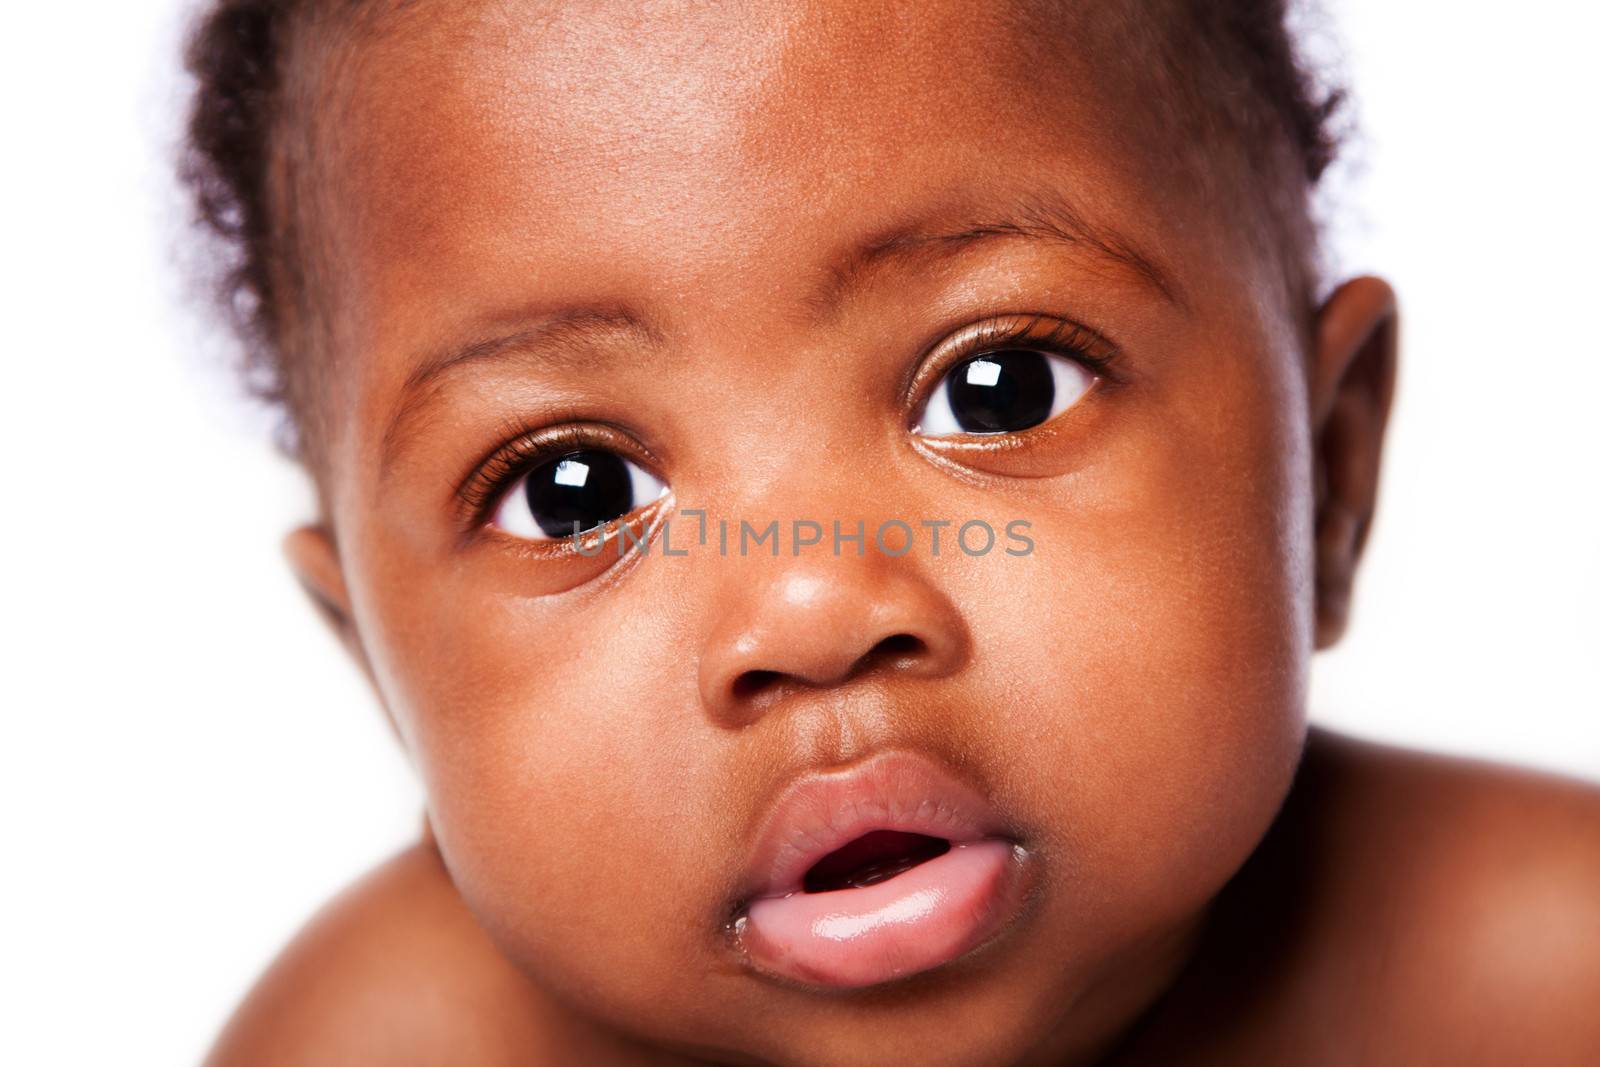 Closeup of cute adorable beautiful face of African baby with innocent expression, on white.